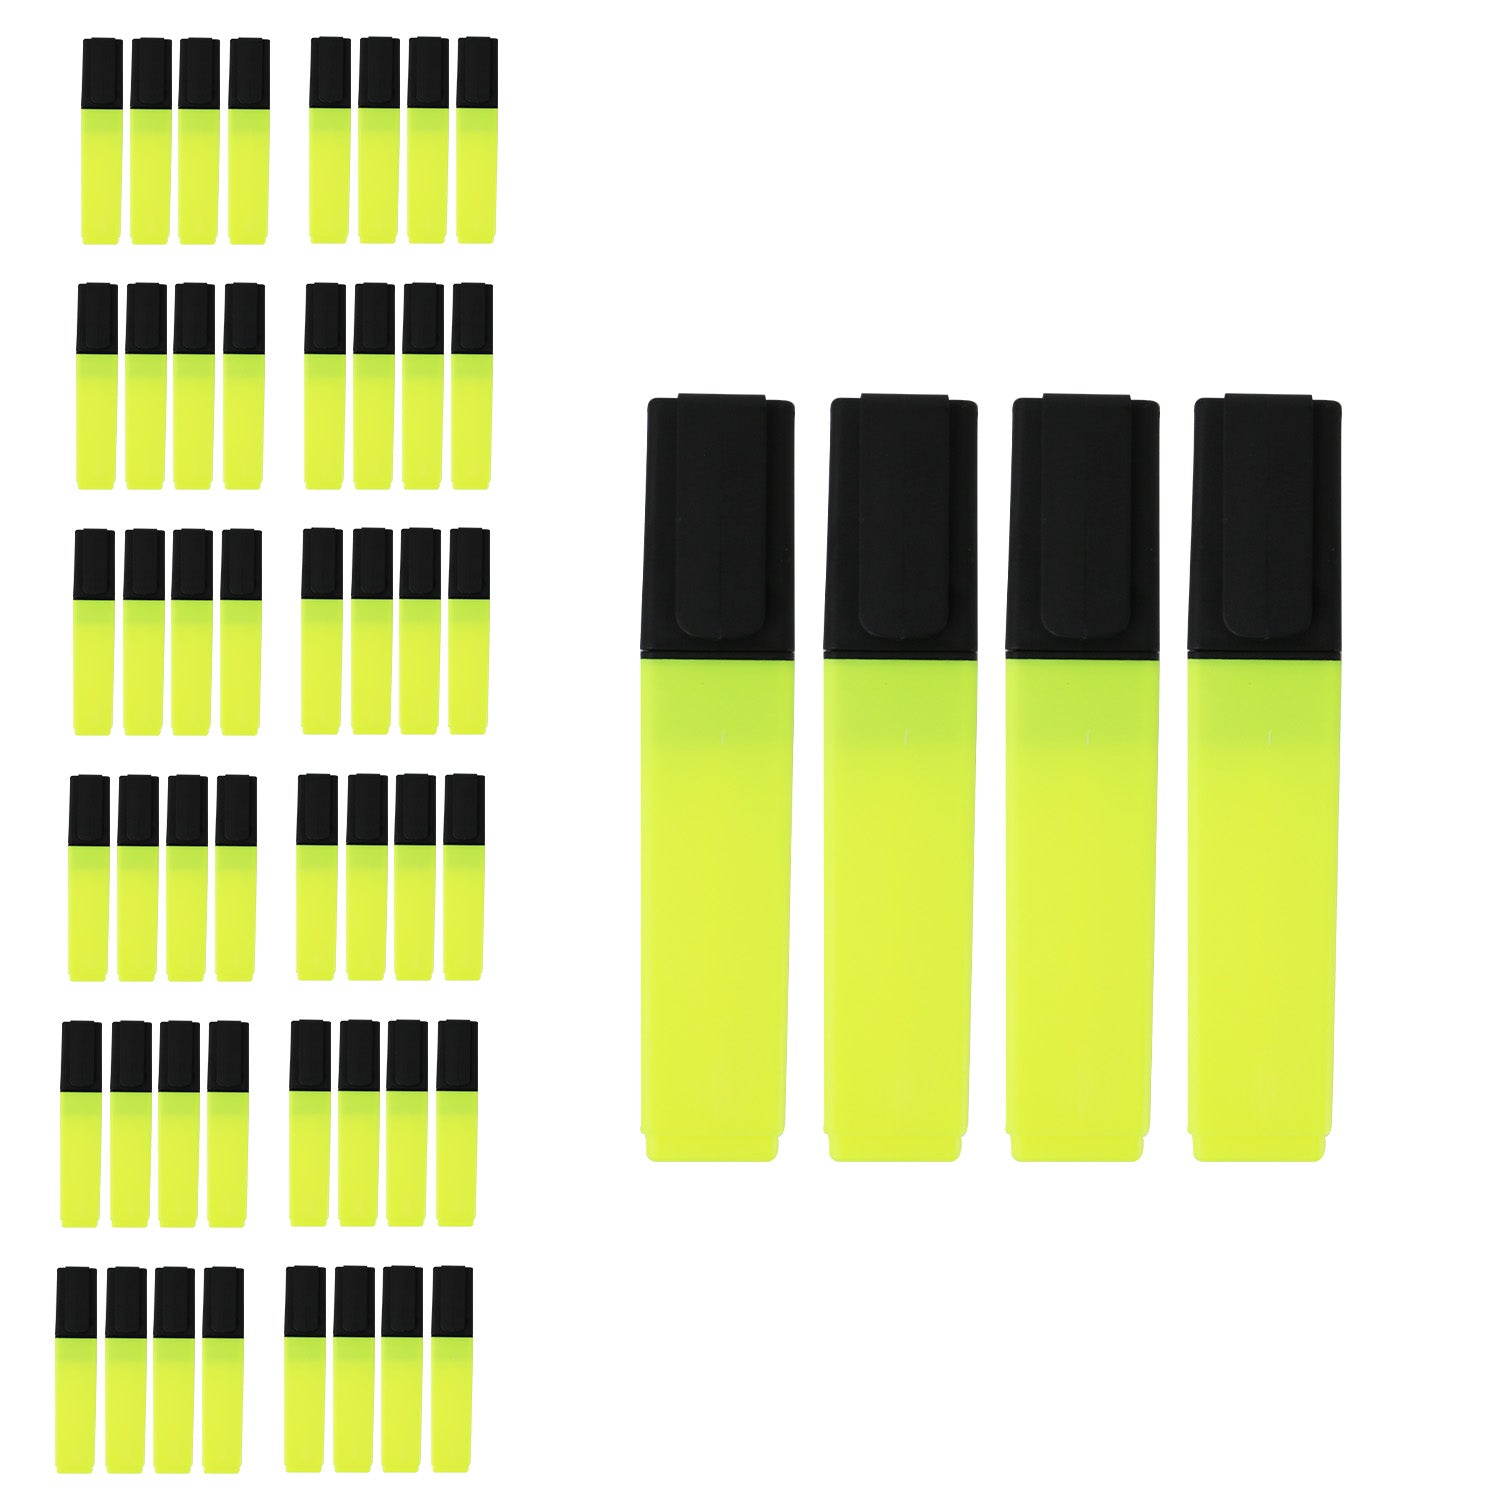 4 Pack of Yellow Highlighters - Bulk School Supplies Wholesale Case of 96 Packs of Highlighters